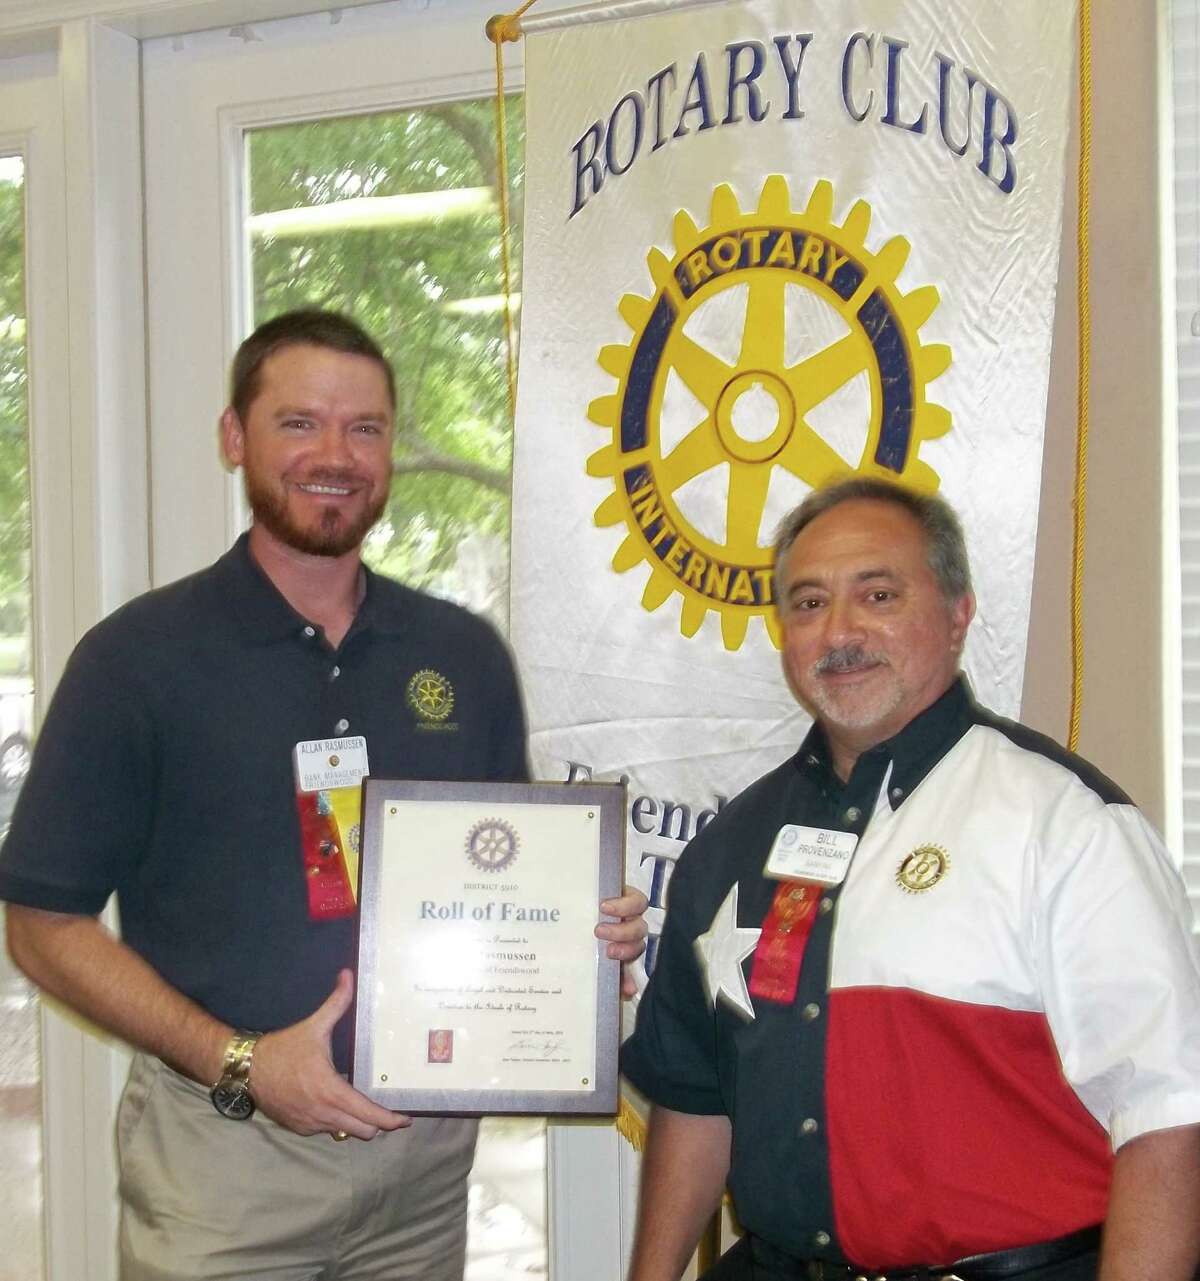 Allan Rasmussen was inducted into the Roll of Fame, a Rotary District 5910 program intended to honor Rotarians who demonstrate outstanding service to the social service organization and their local communities.